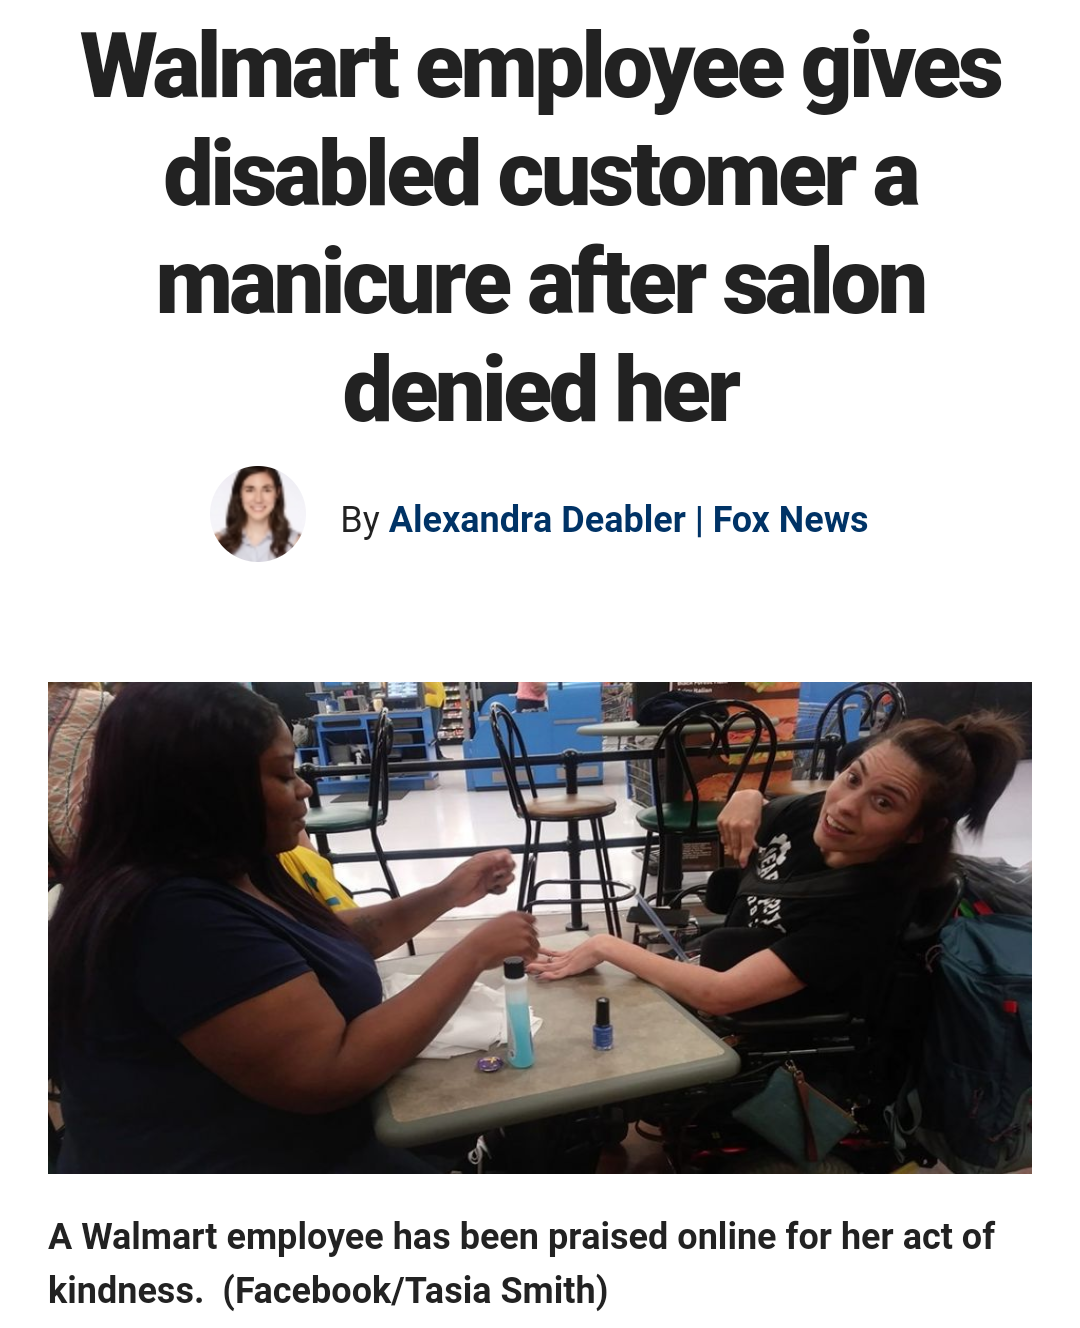 conversation - Walmart employee gives disabled customer a manicure after salon denied her By Alexandra Deabler Fox News A Walmart employee has been praised online for her act of kindness. FacebookTasia Smith